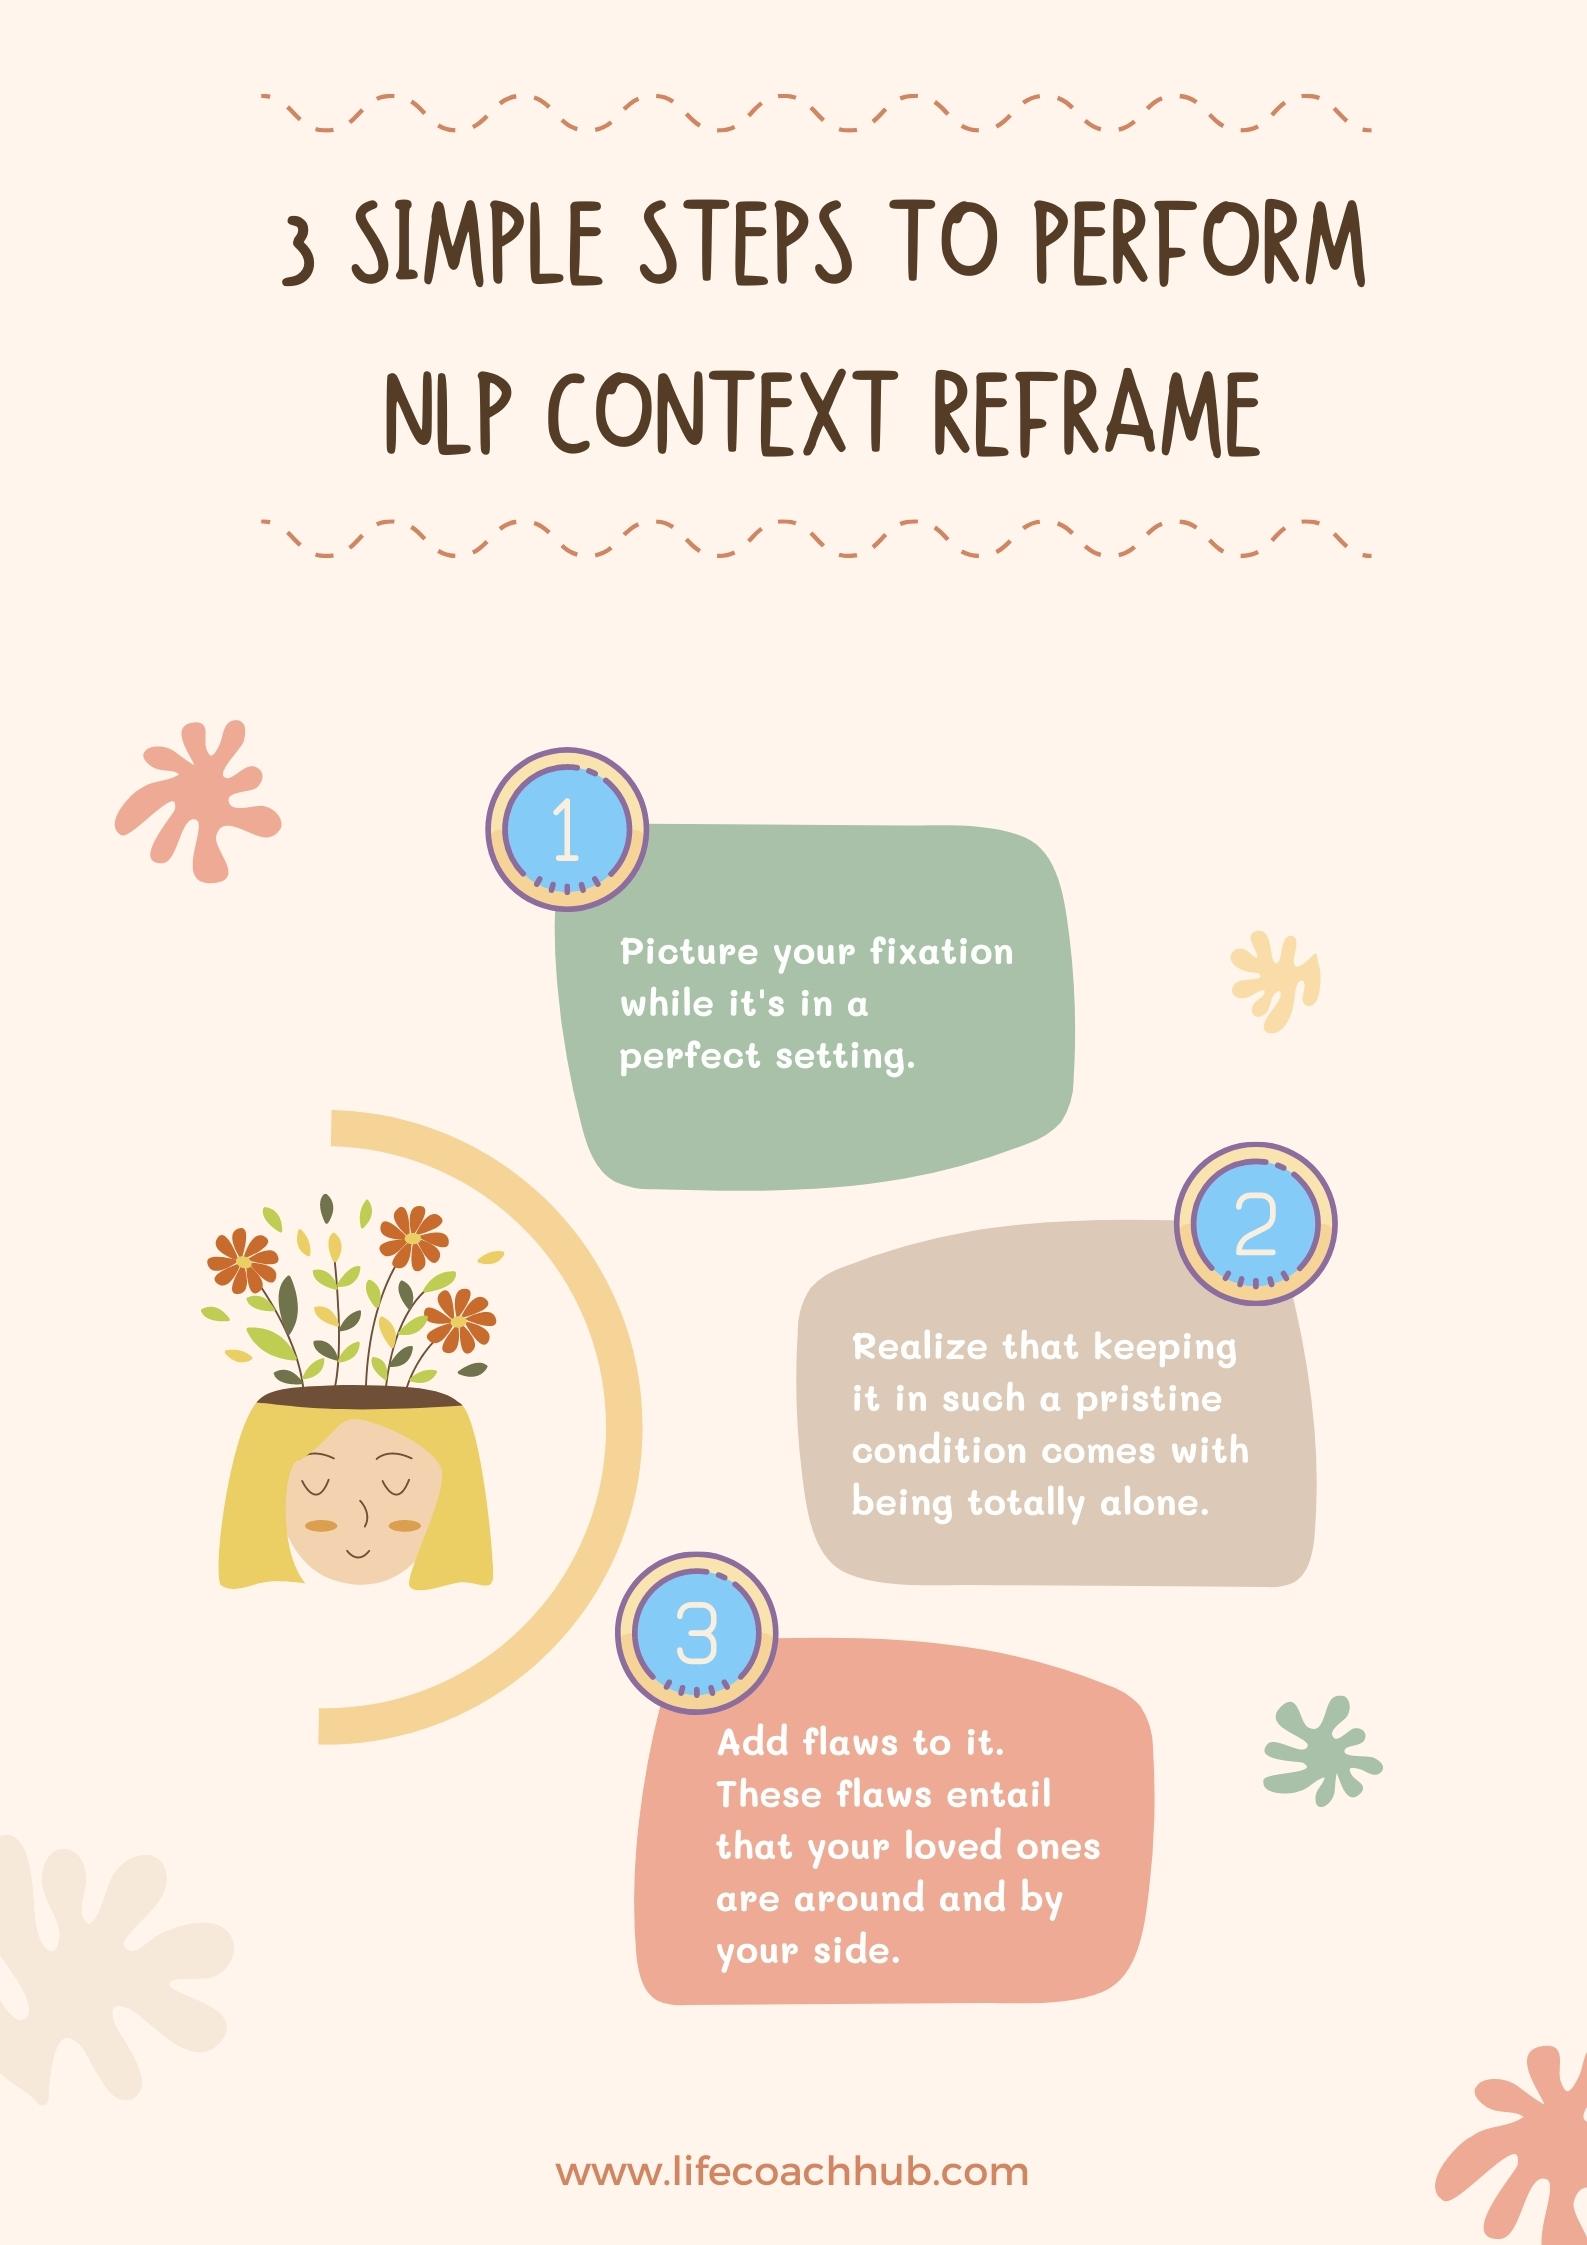 Steps to perform NLP context reframe